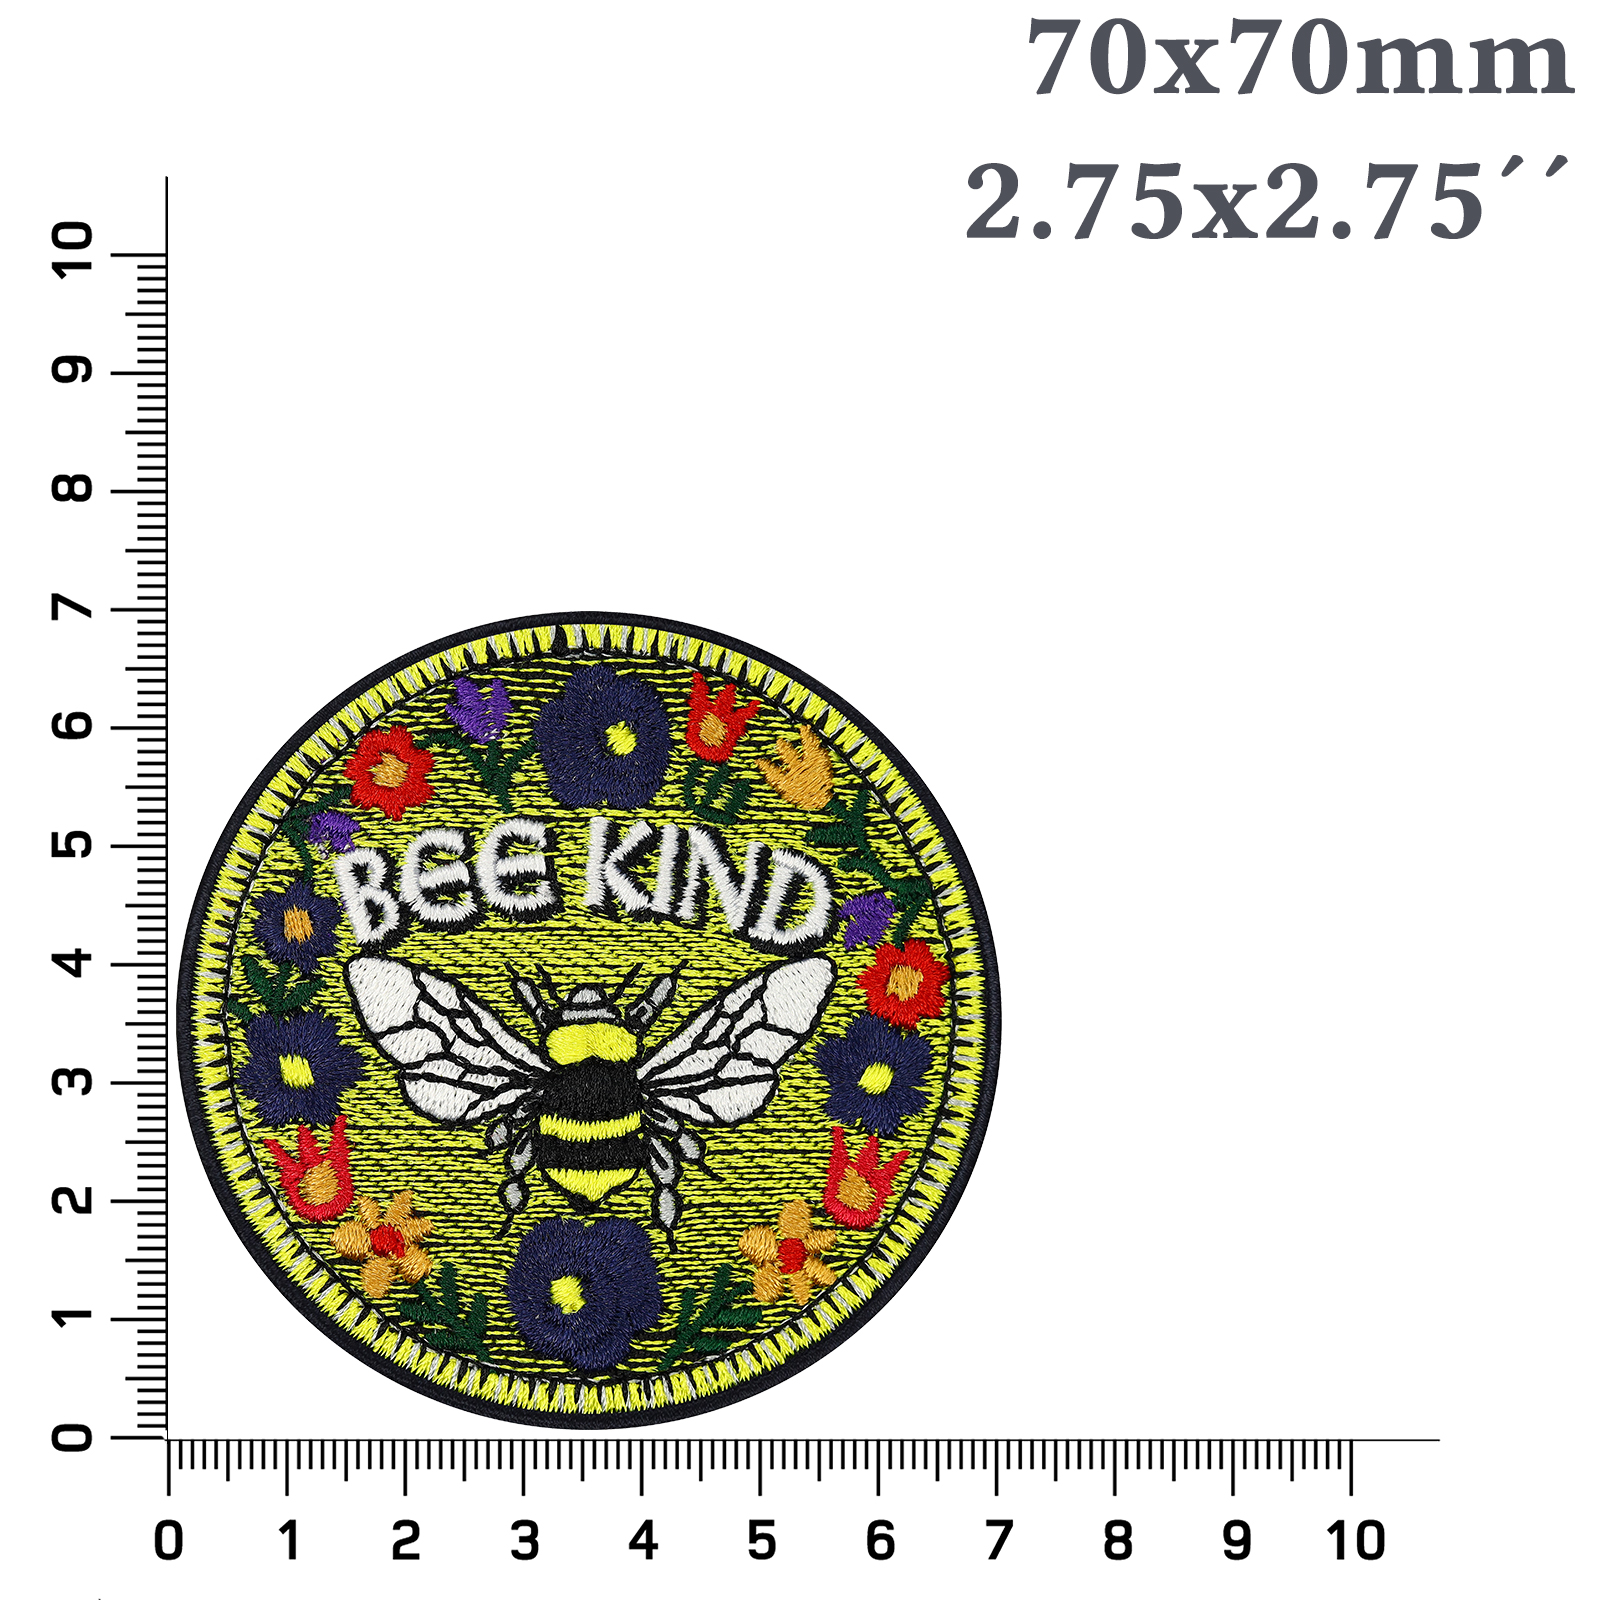 Bee kind - Patch